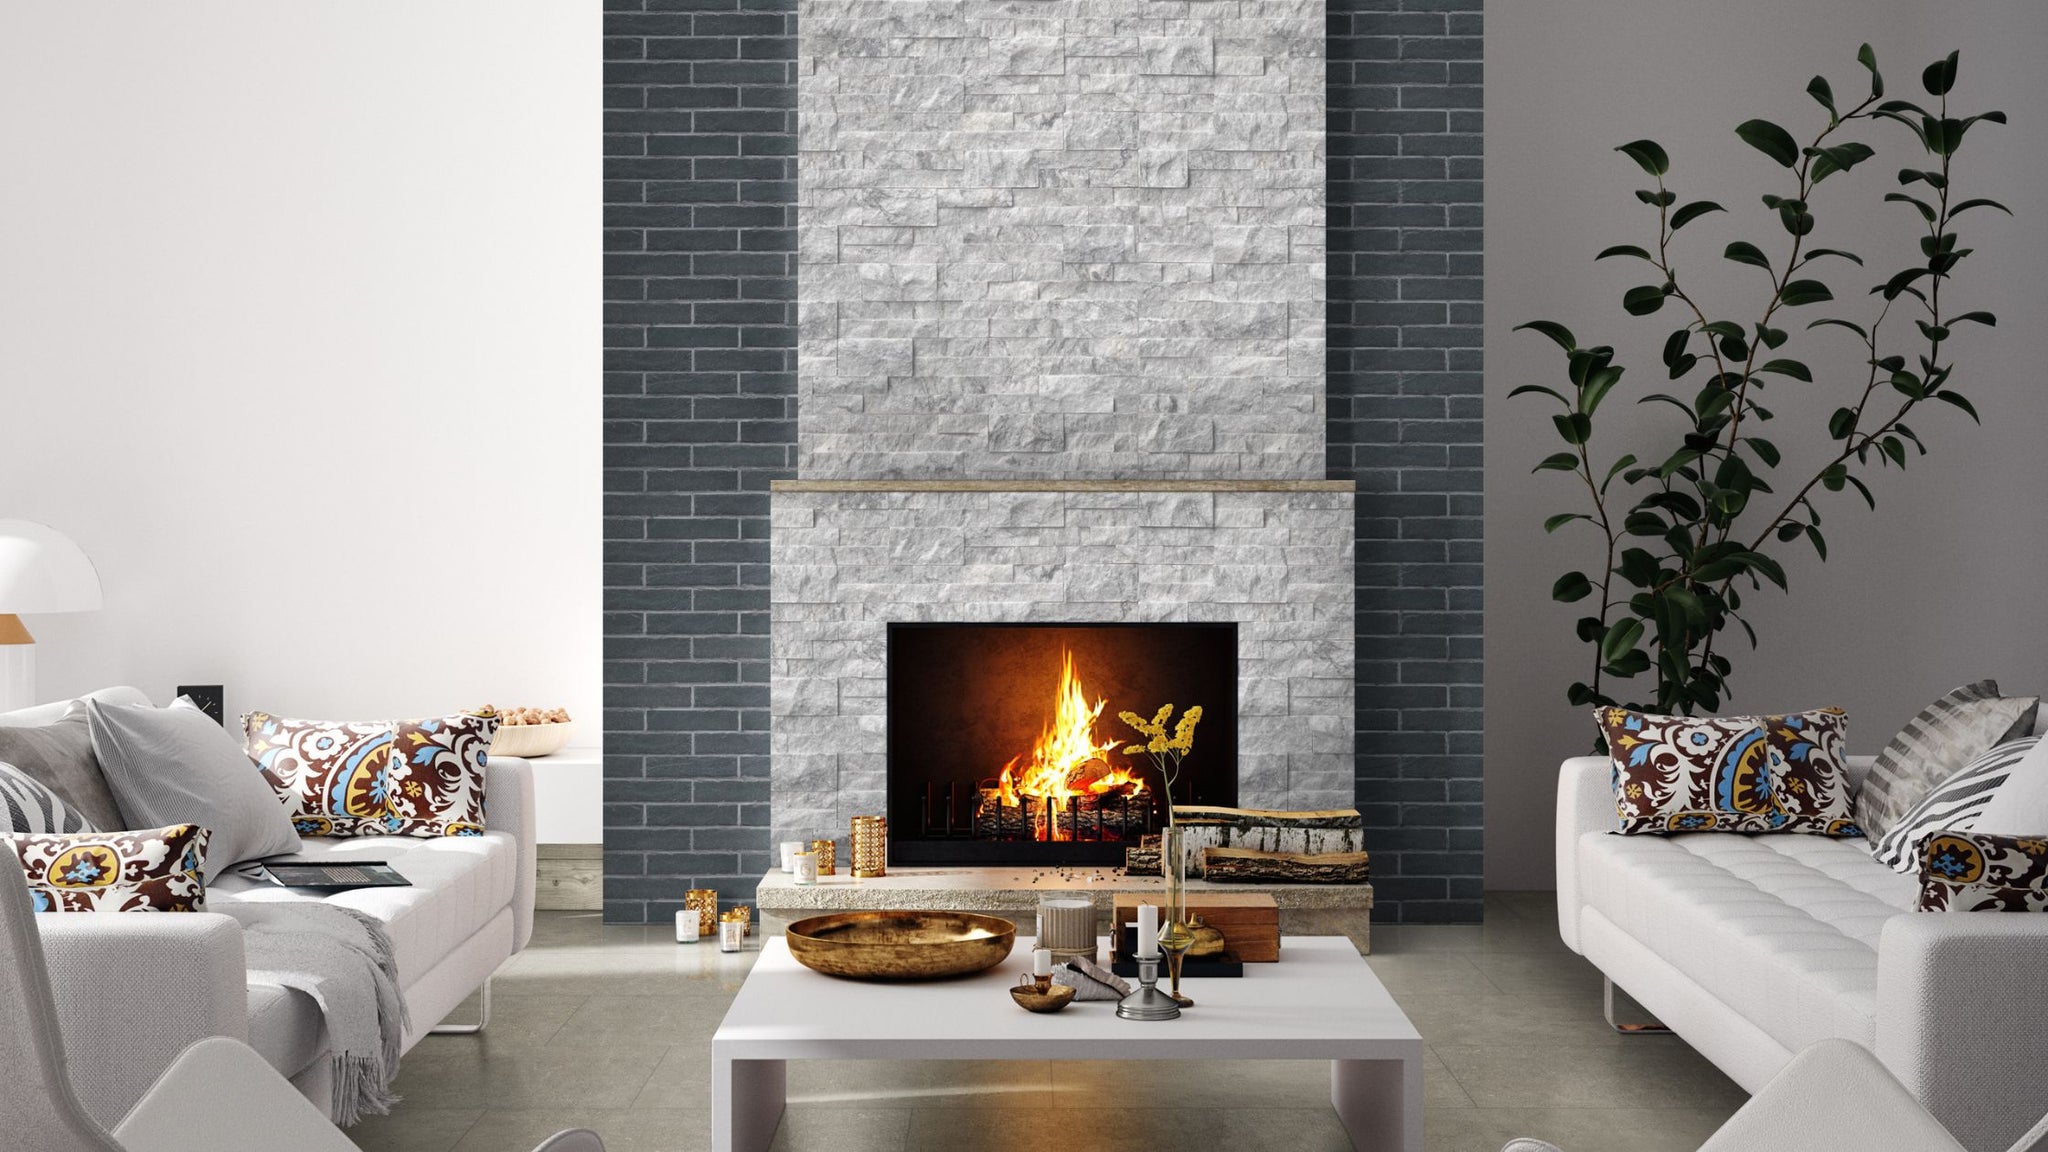 Porcelain Ledger Stone Tile Used Around Fireplace in modern living room with white couches.